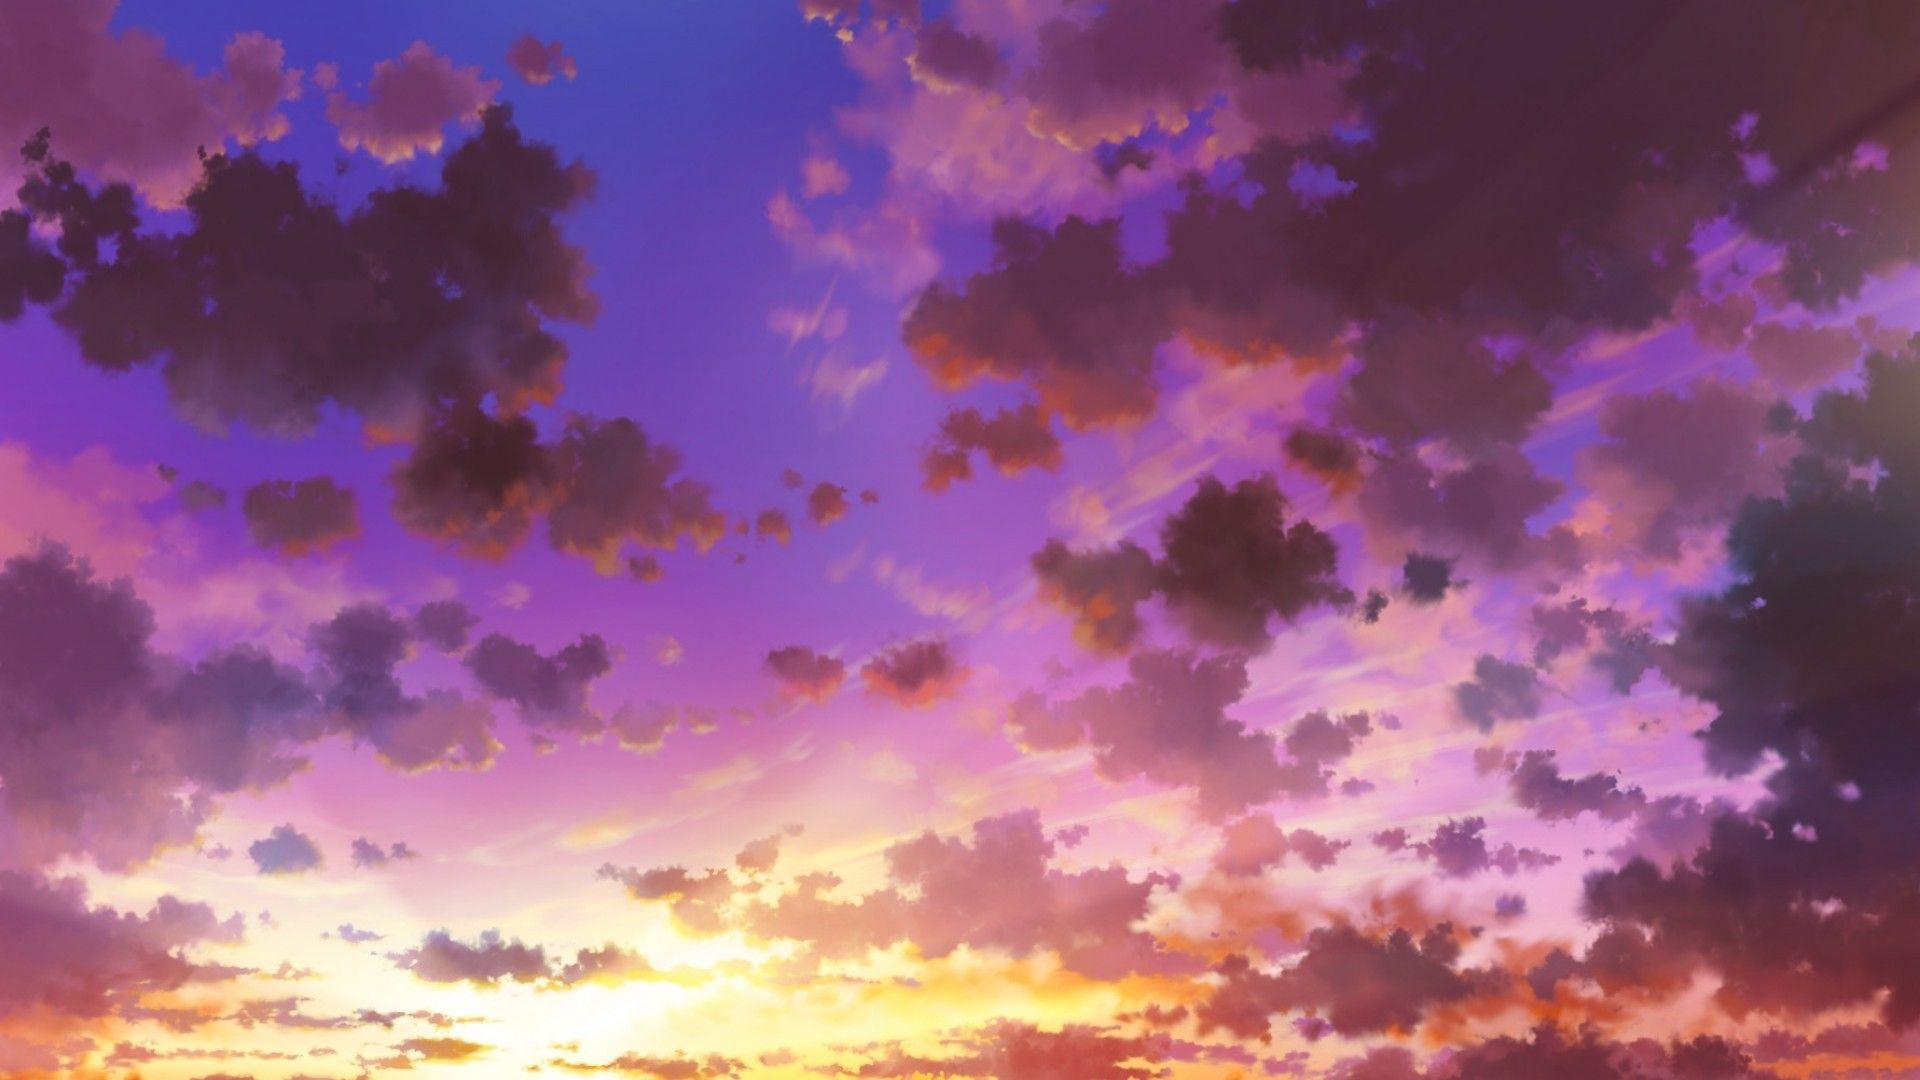 Download 1920x1080 Anime Sky, Sunset, Clouds Wallpaper